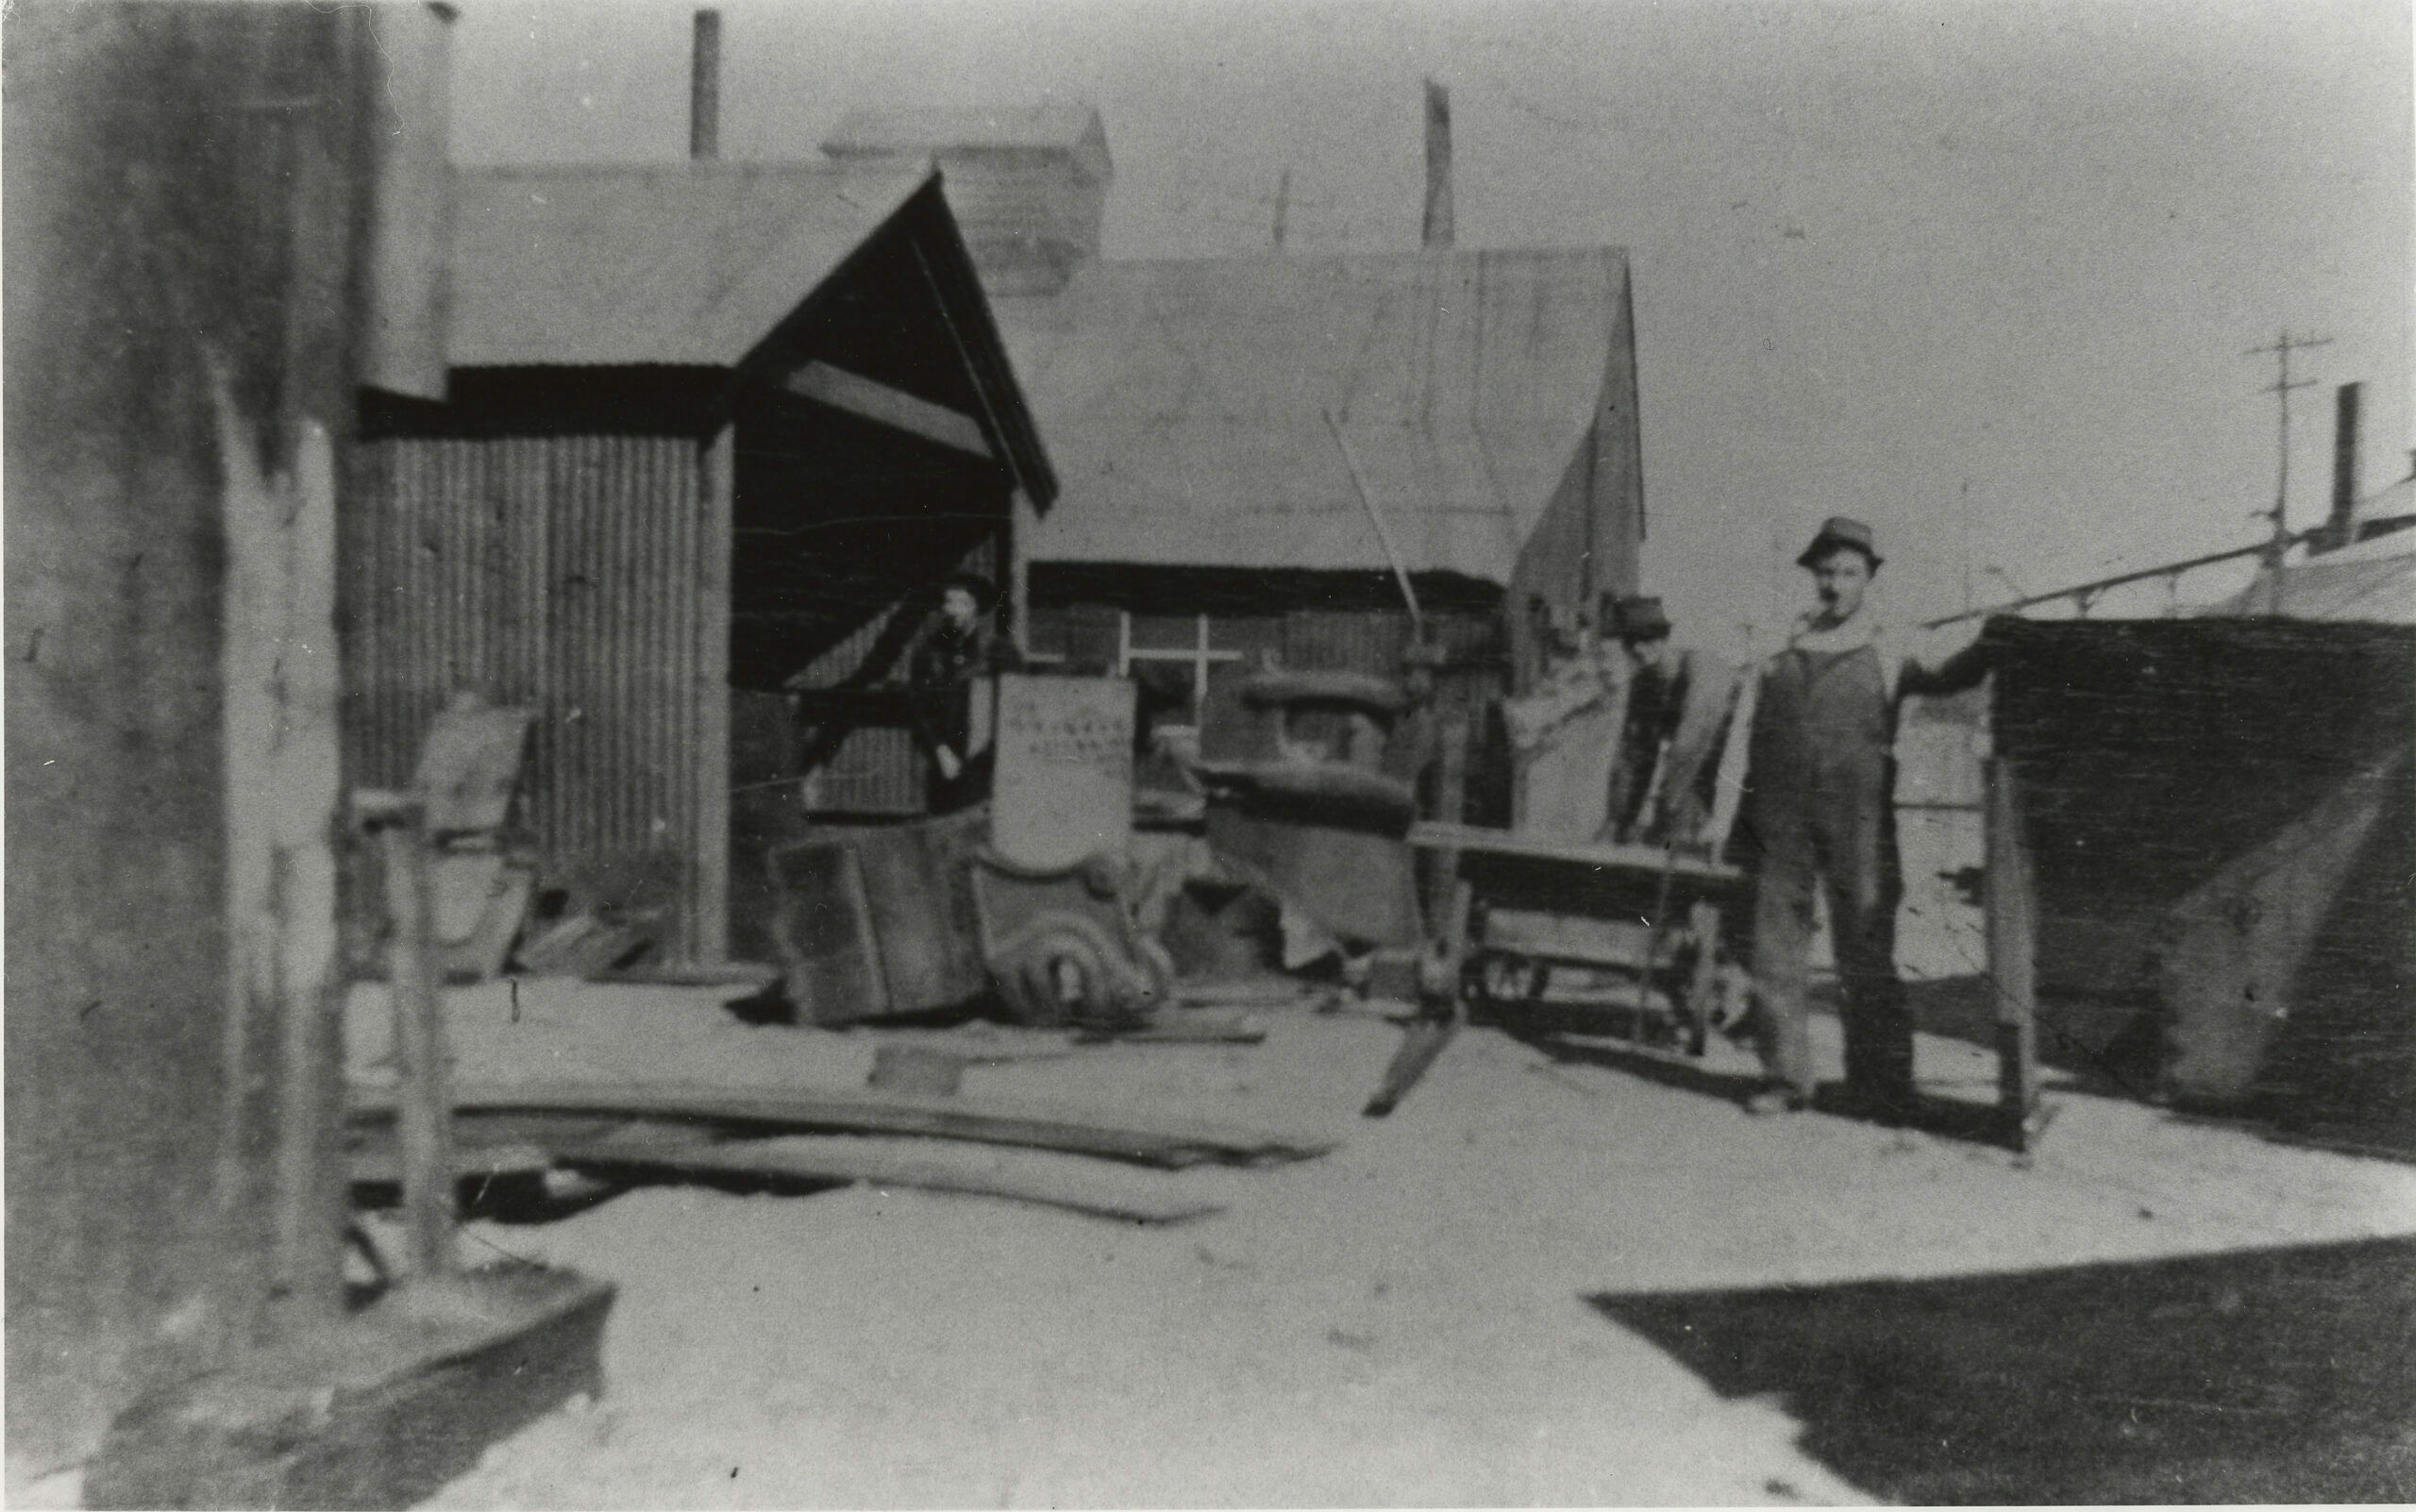 ca. 1909 – A. B. Stein went to work at the Salida smelter as a boiler maker’s helper. Over his left shoulder can be seen two chimneys of the blast furnaces. The camera view was looking to the west.